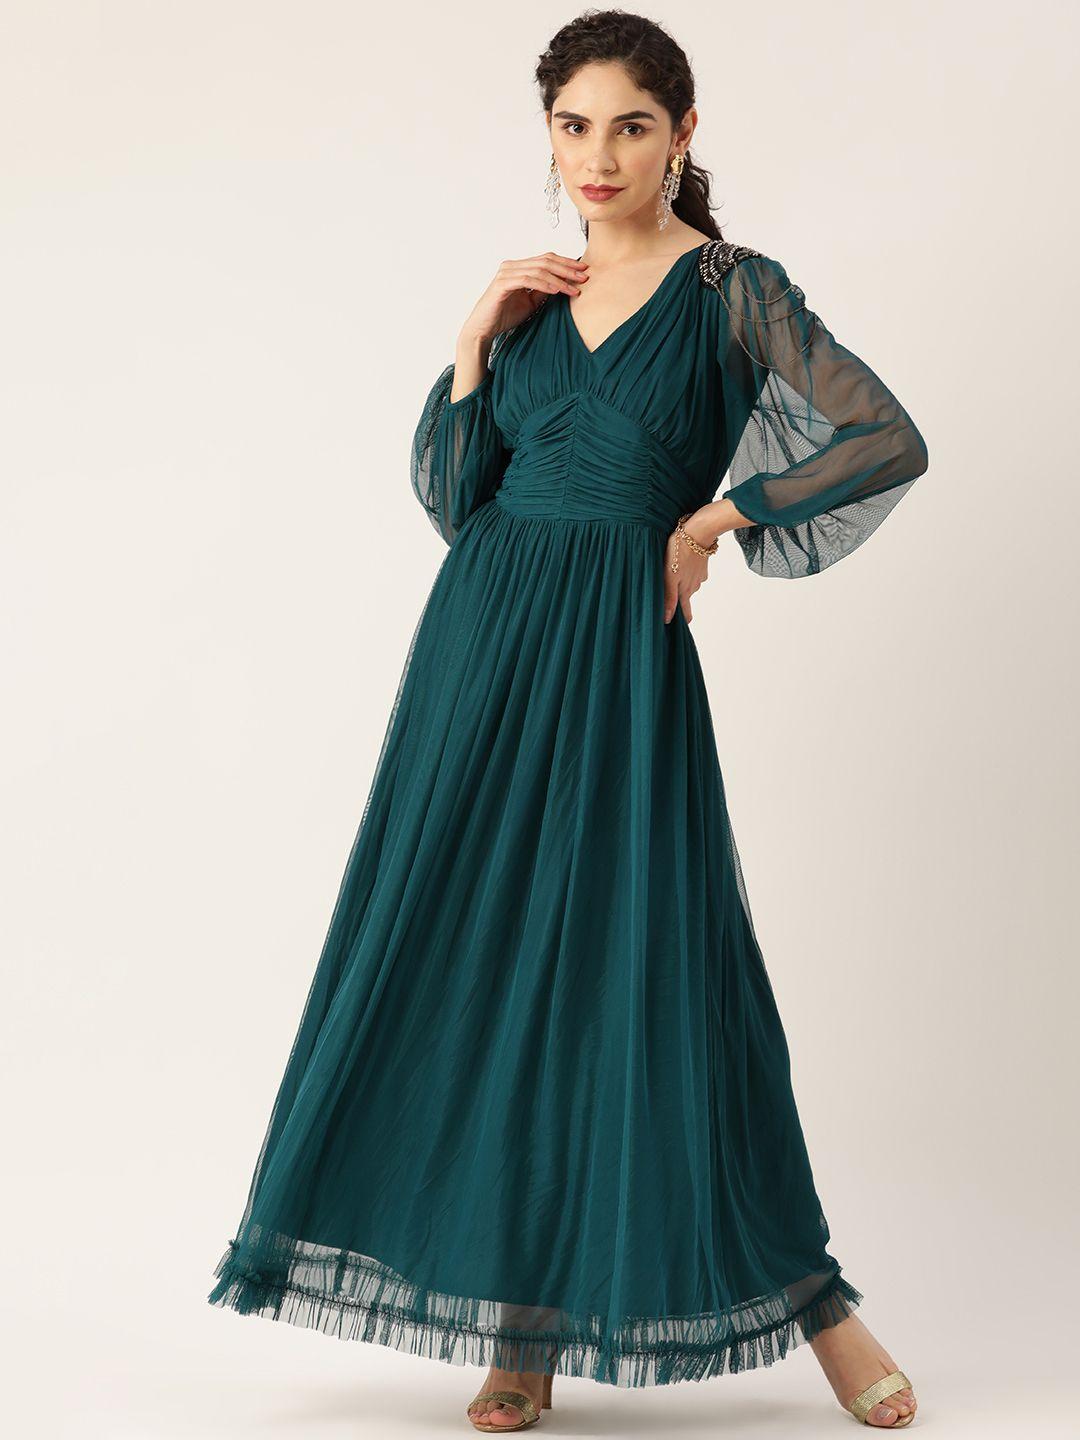 antheaa teal green net ruched ethnic maxi dress